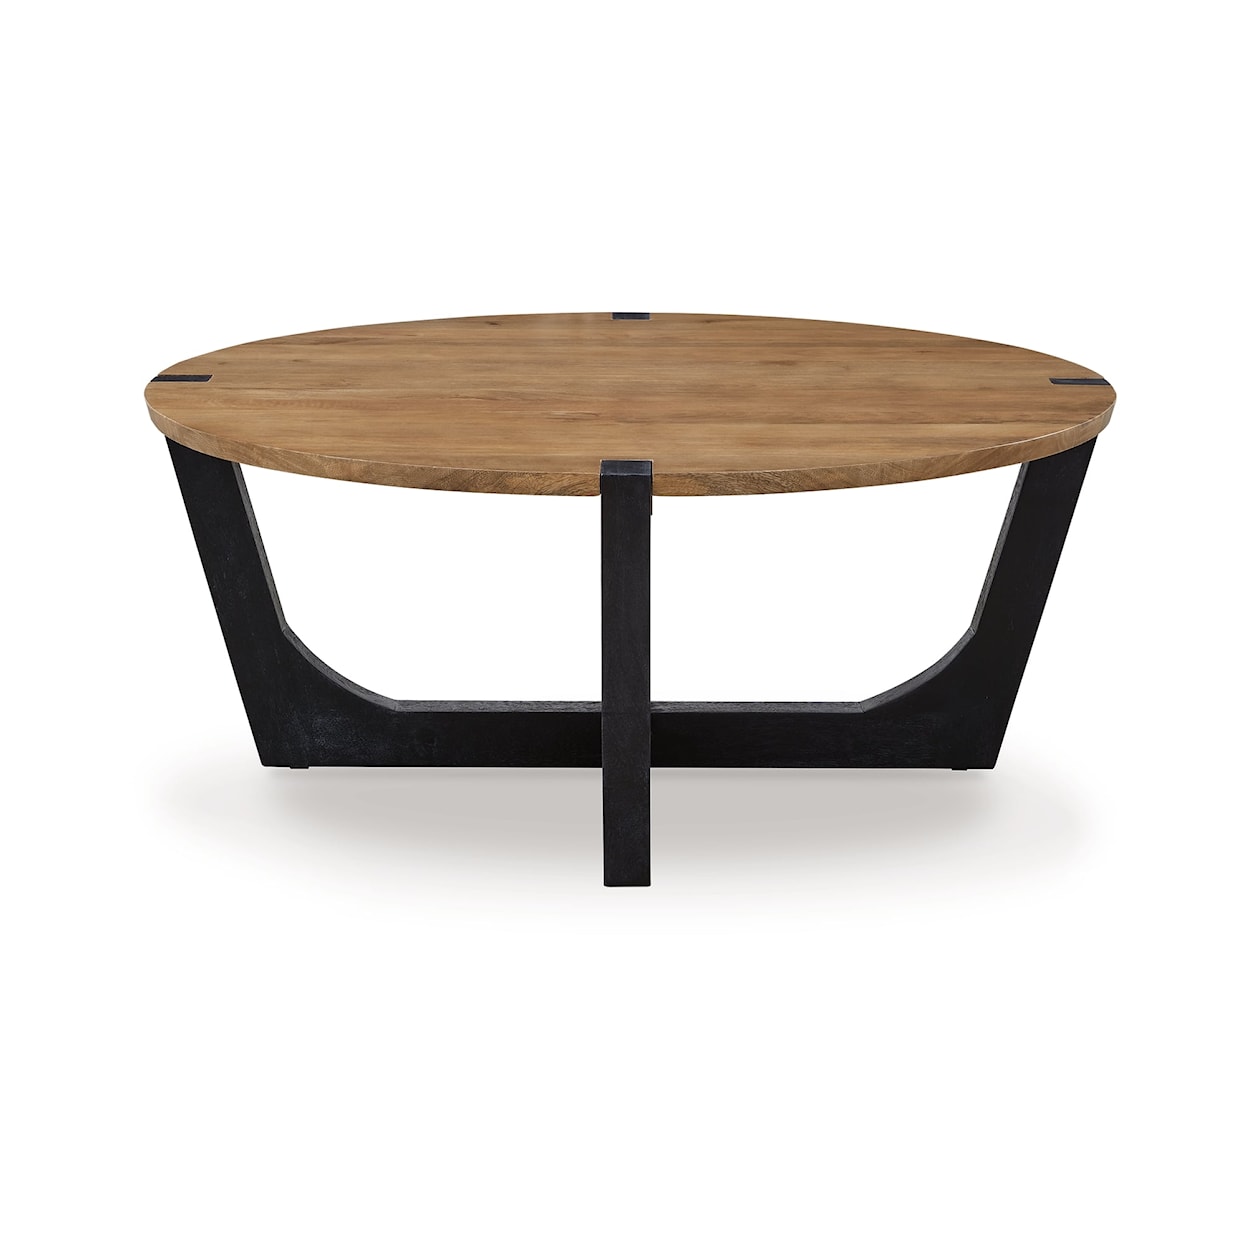 Signature Design by Ashley Hanneforth Round Coffee Table